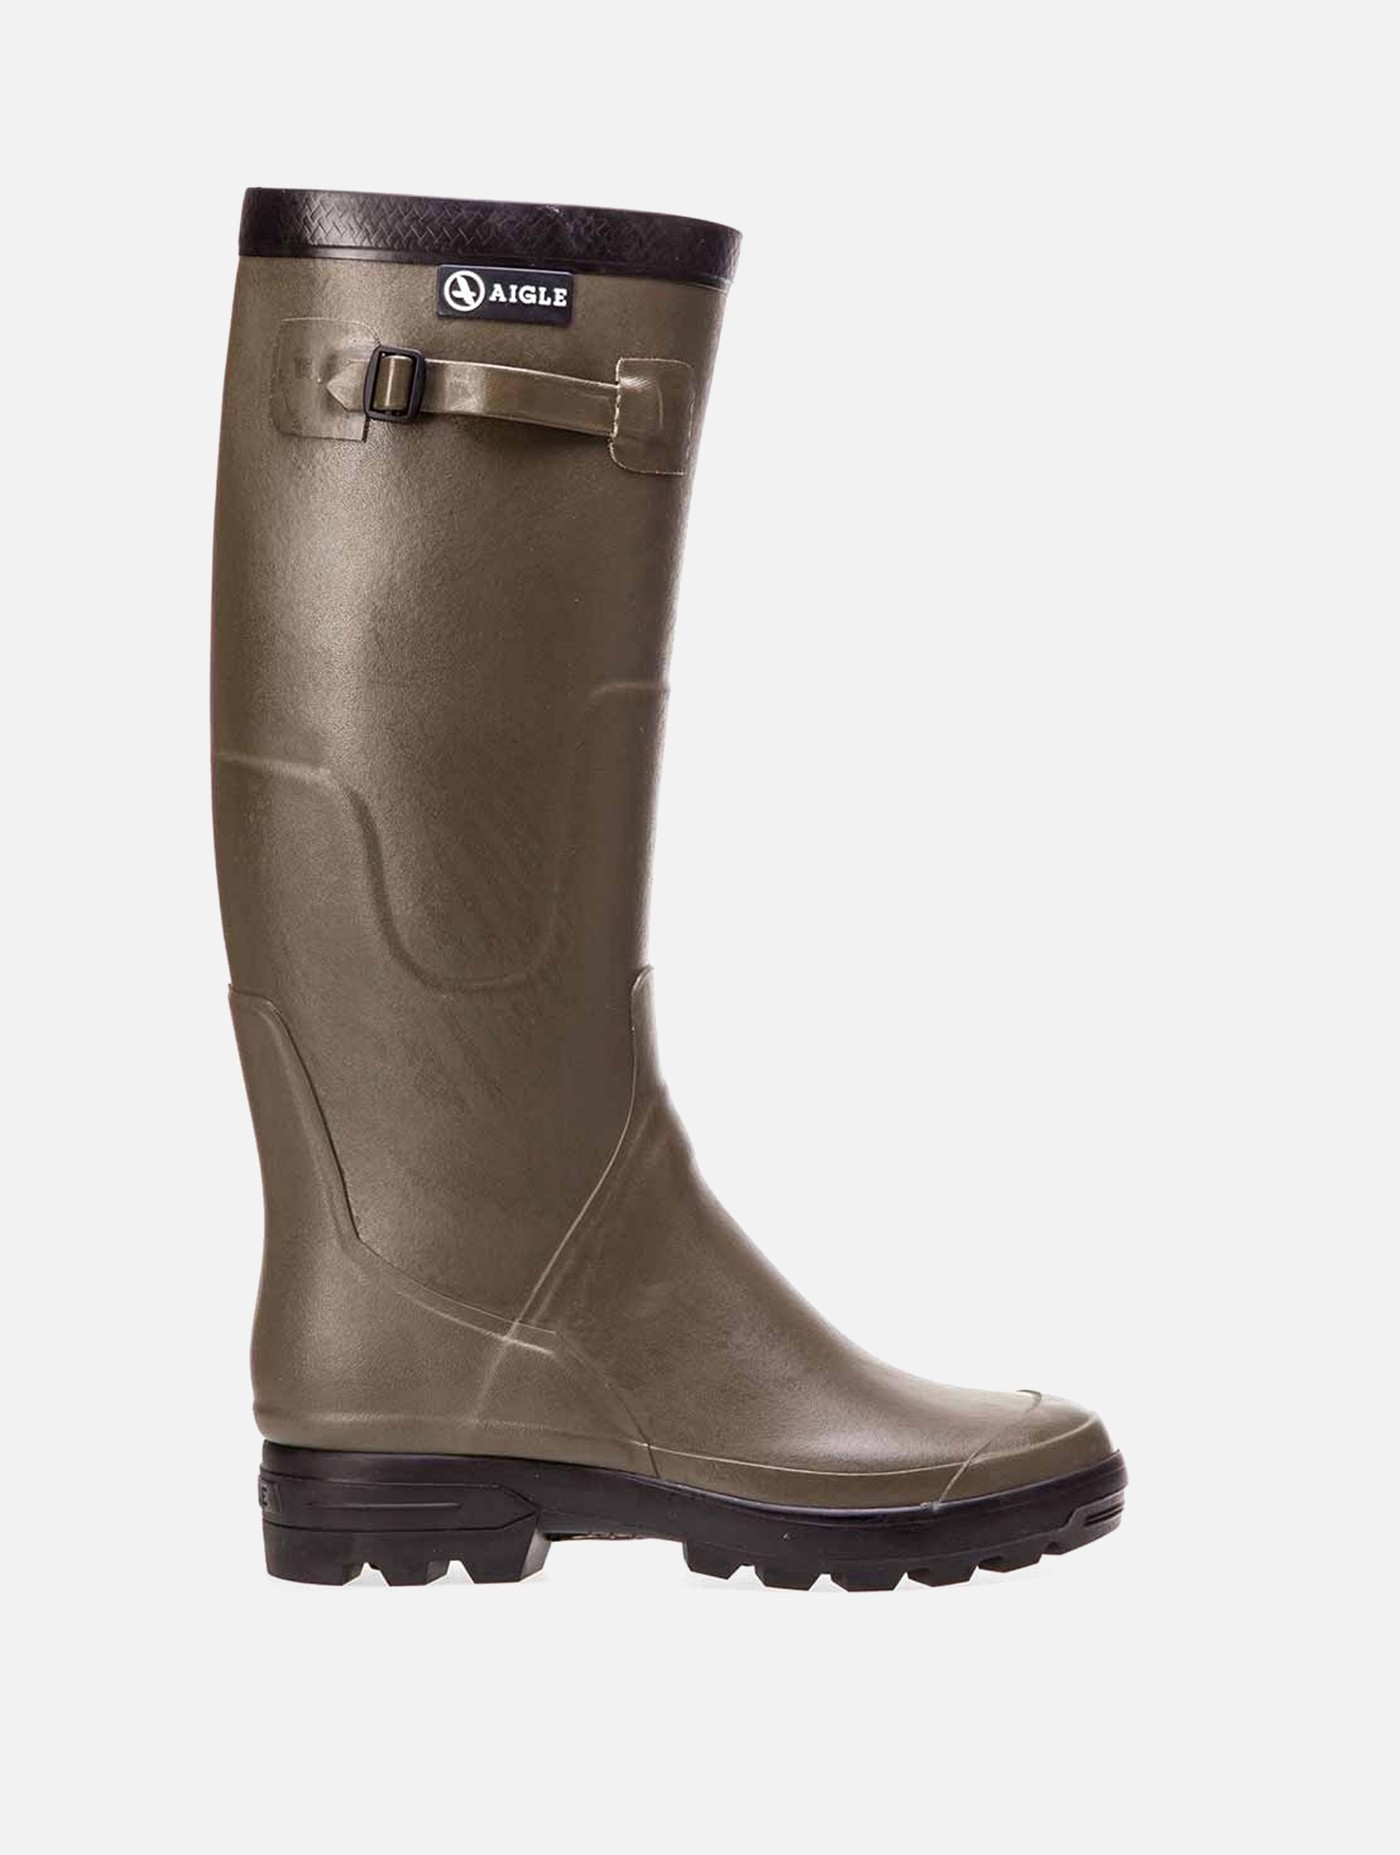 Aigle Benyl Outdoor Boots - Country Clothing